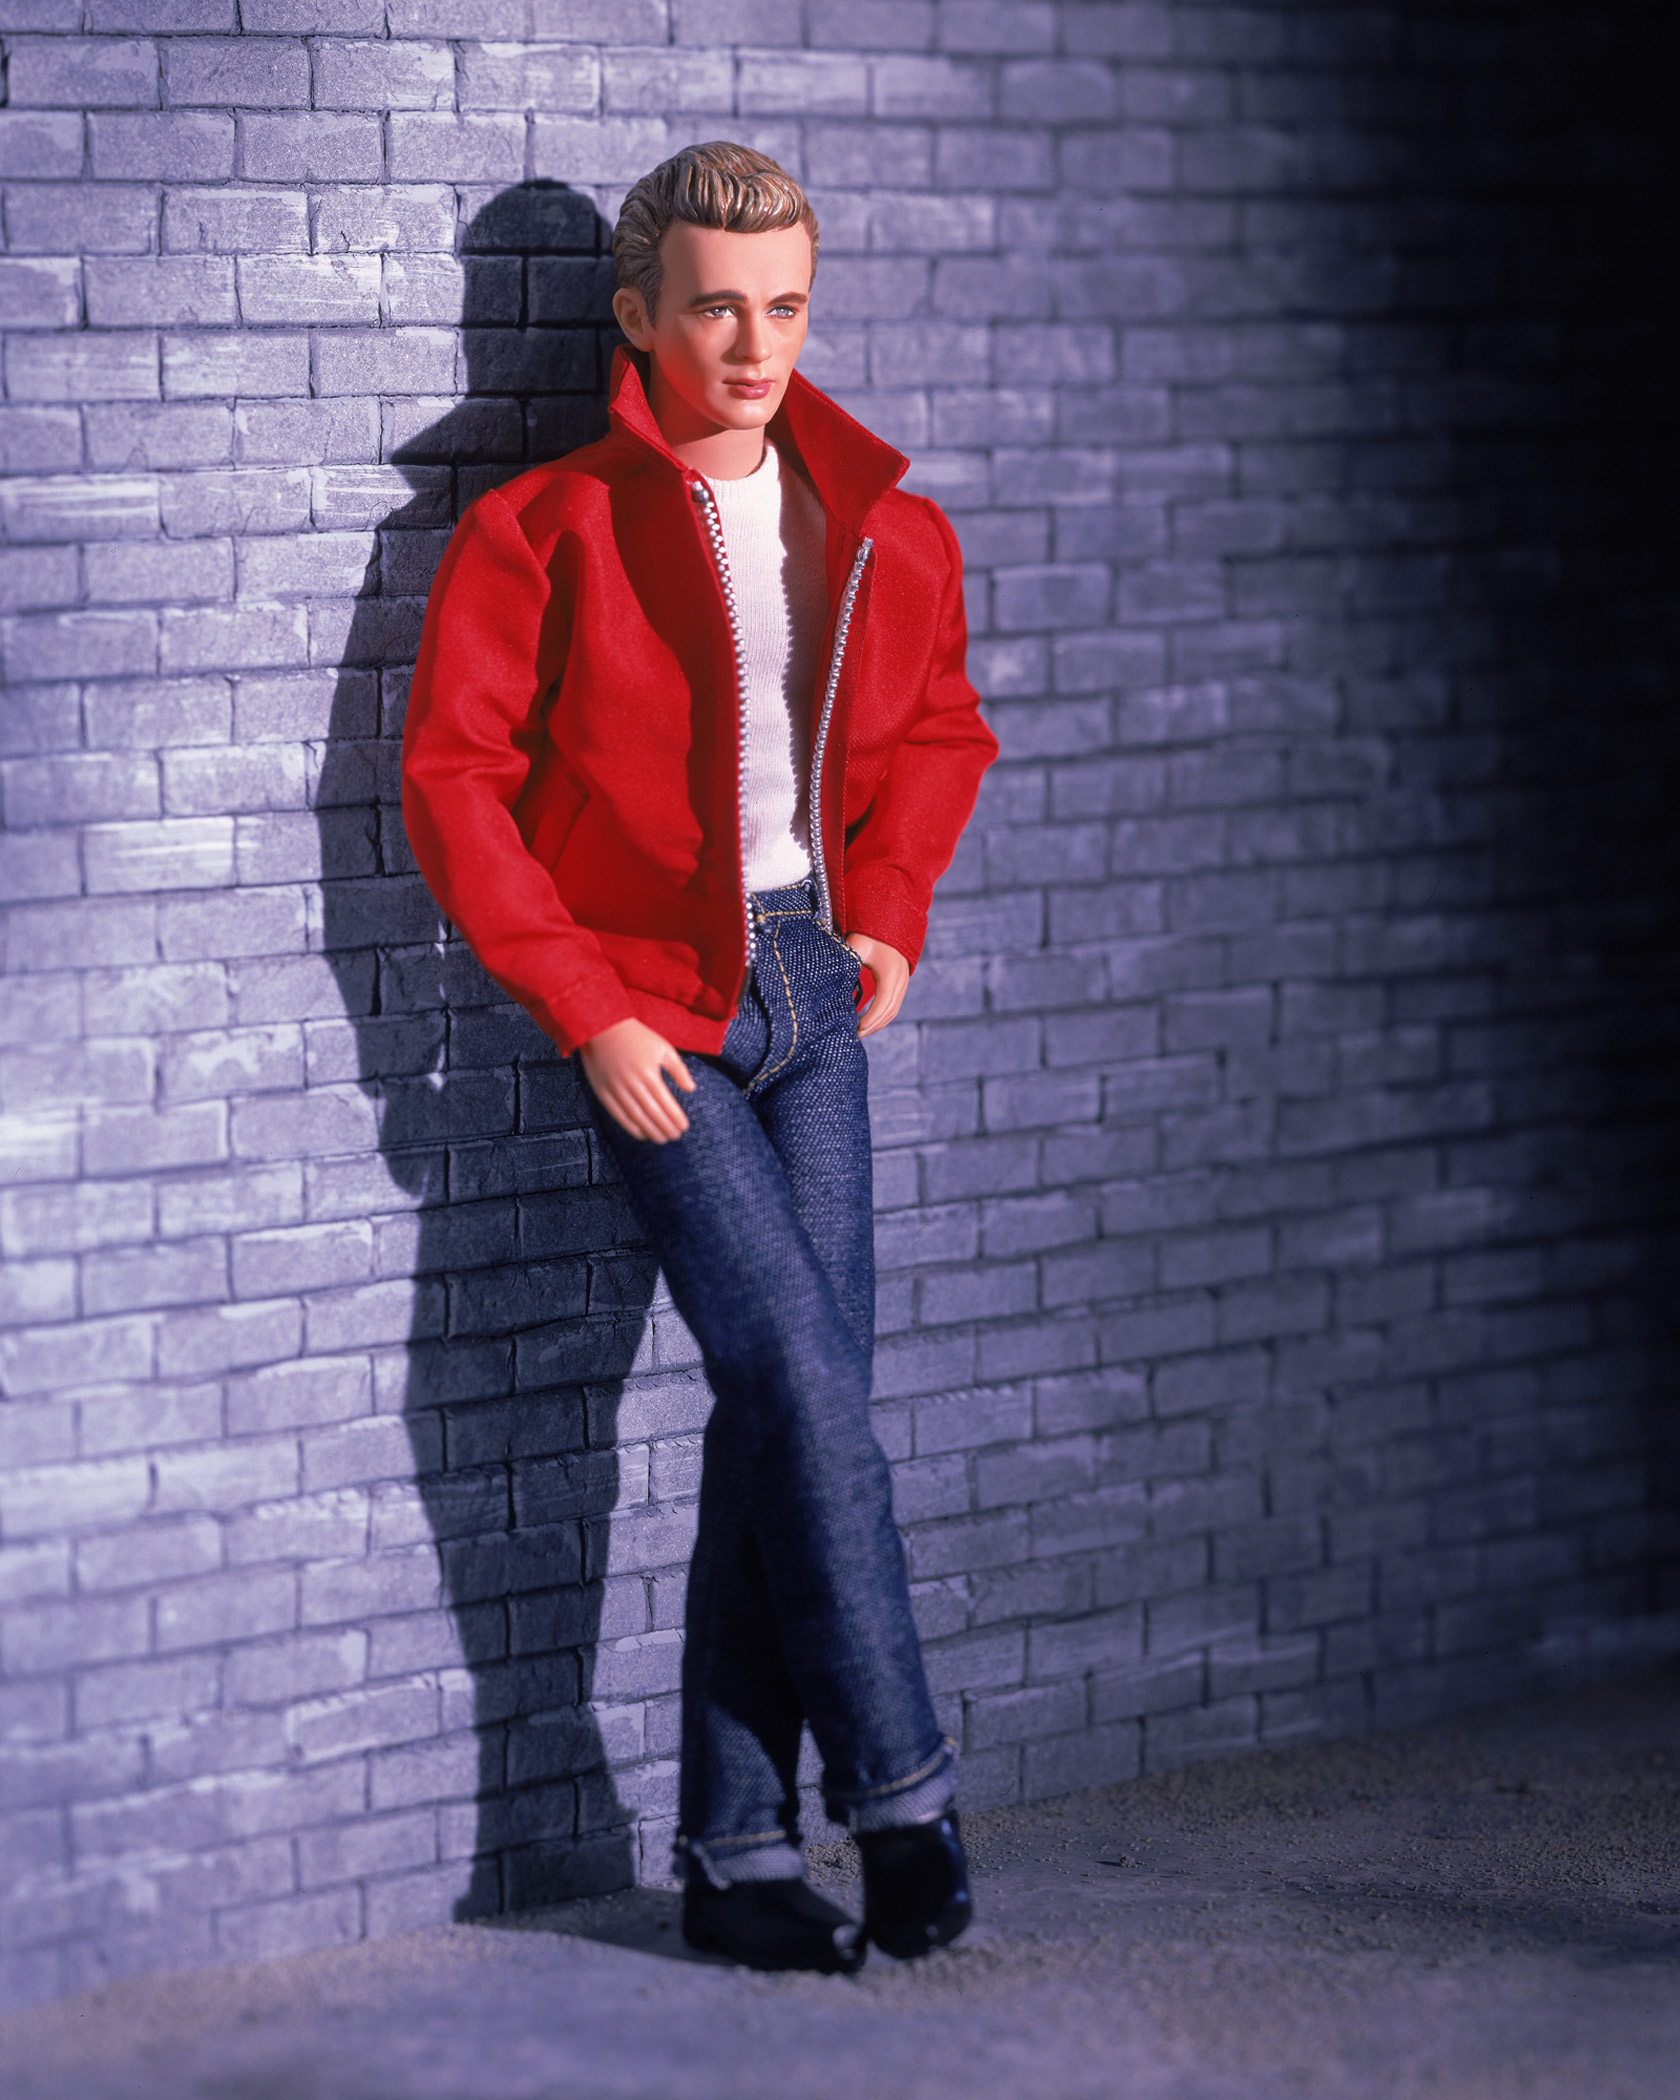 The James Dean Barbie, released in 2001.